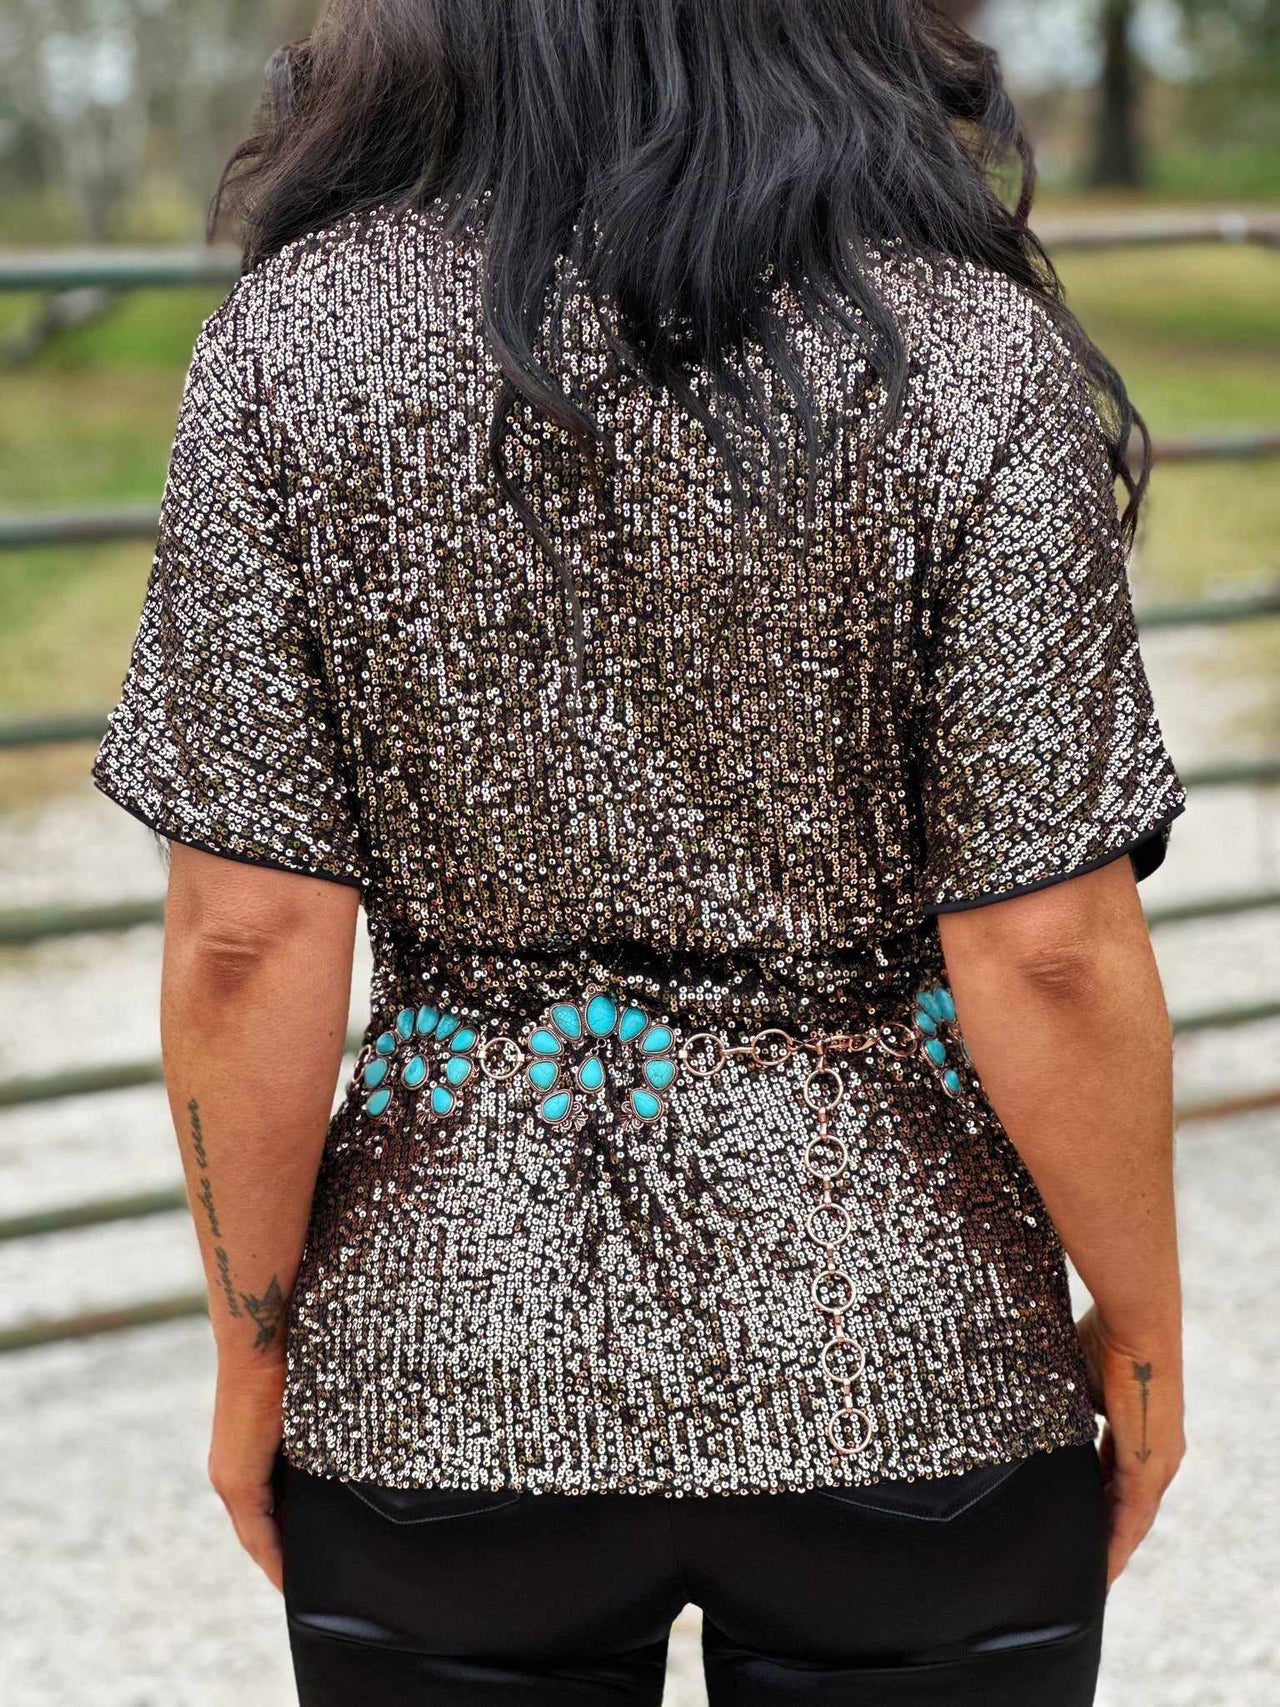 Sequin Tunic Top - Black and Gold